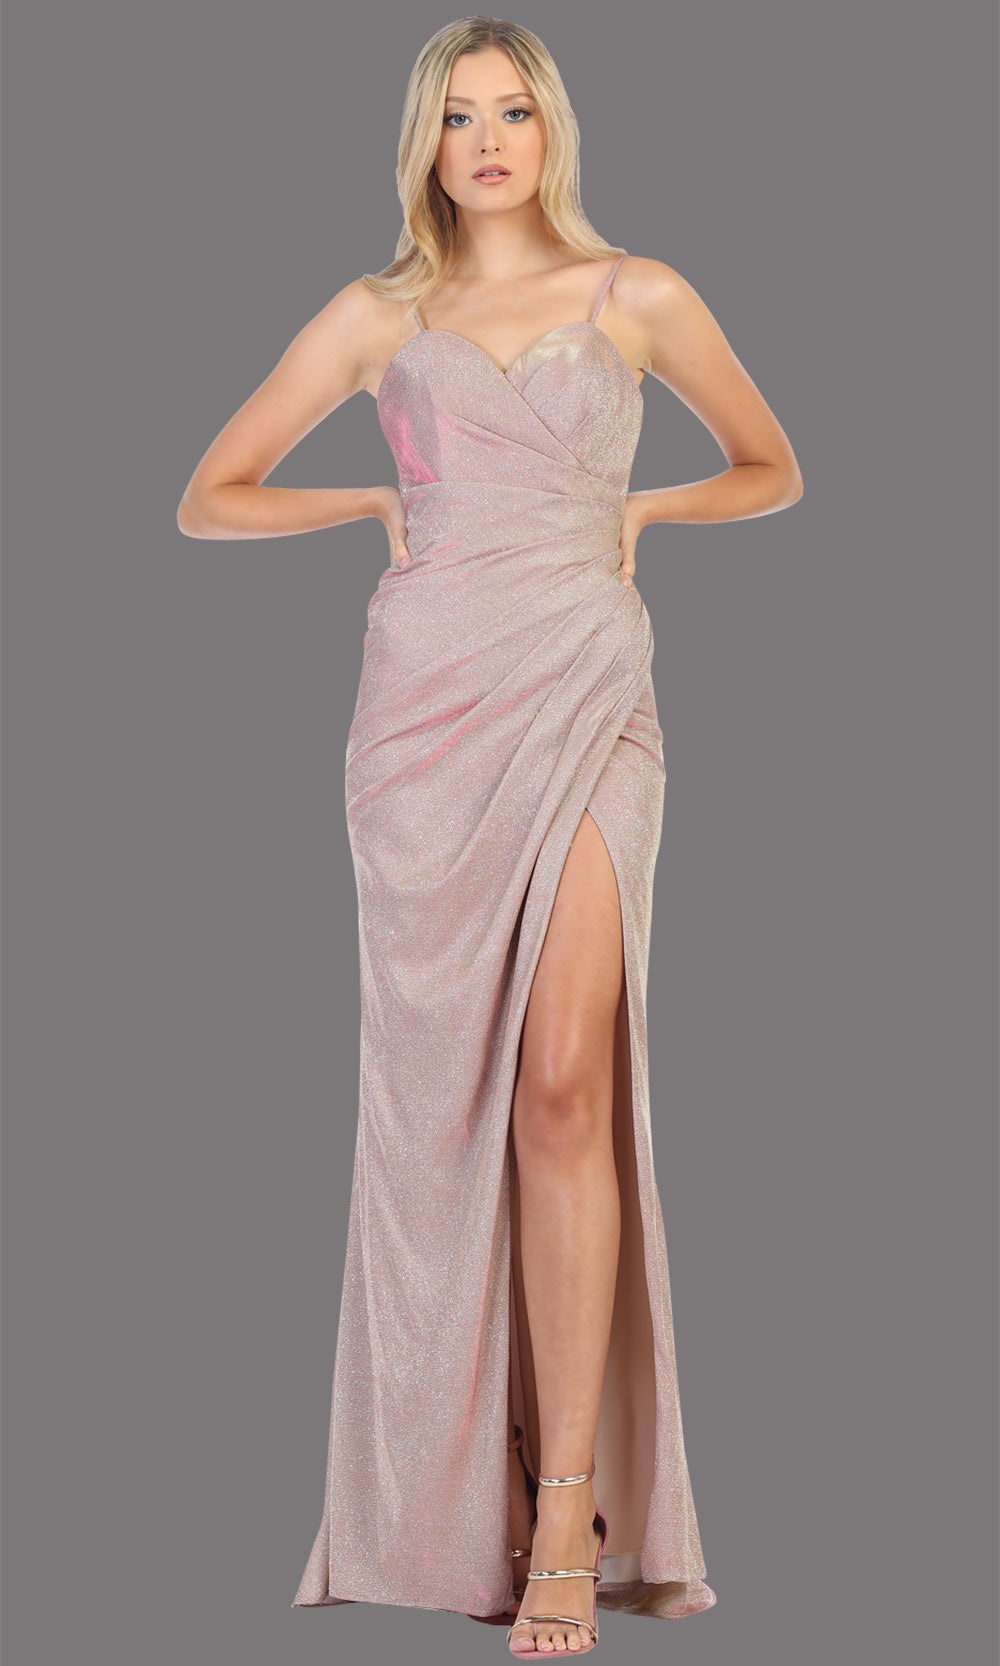 Mayqueen MQ1730-long rose gold metallic dress with high slit & thin straps. This tight fitted rose gold dress is perfect for formal wedding guest dress, engagement dress, e-shoot dress. This hunter green dress is available in plus sizes